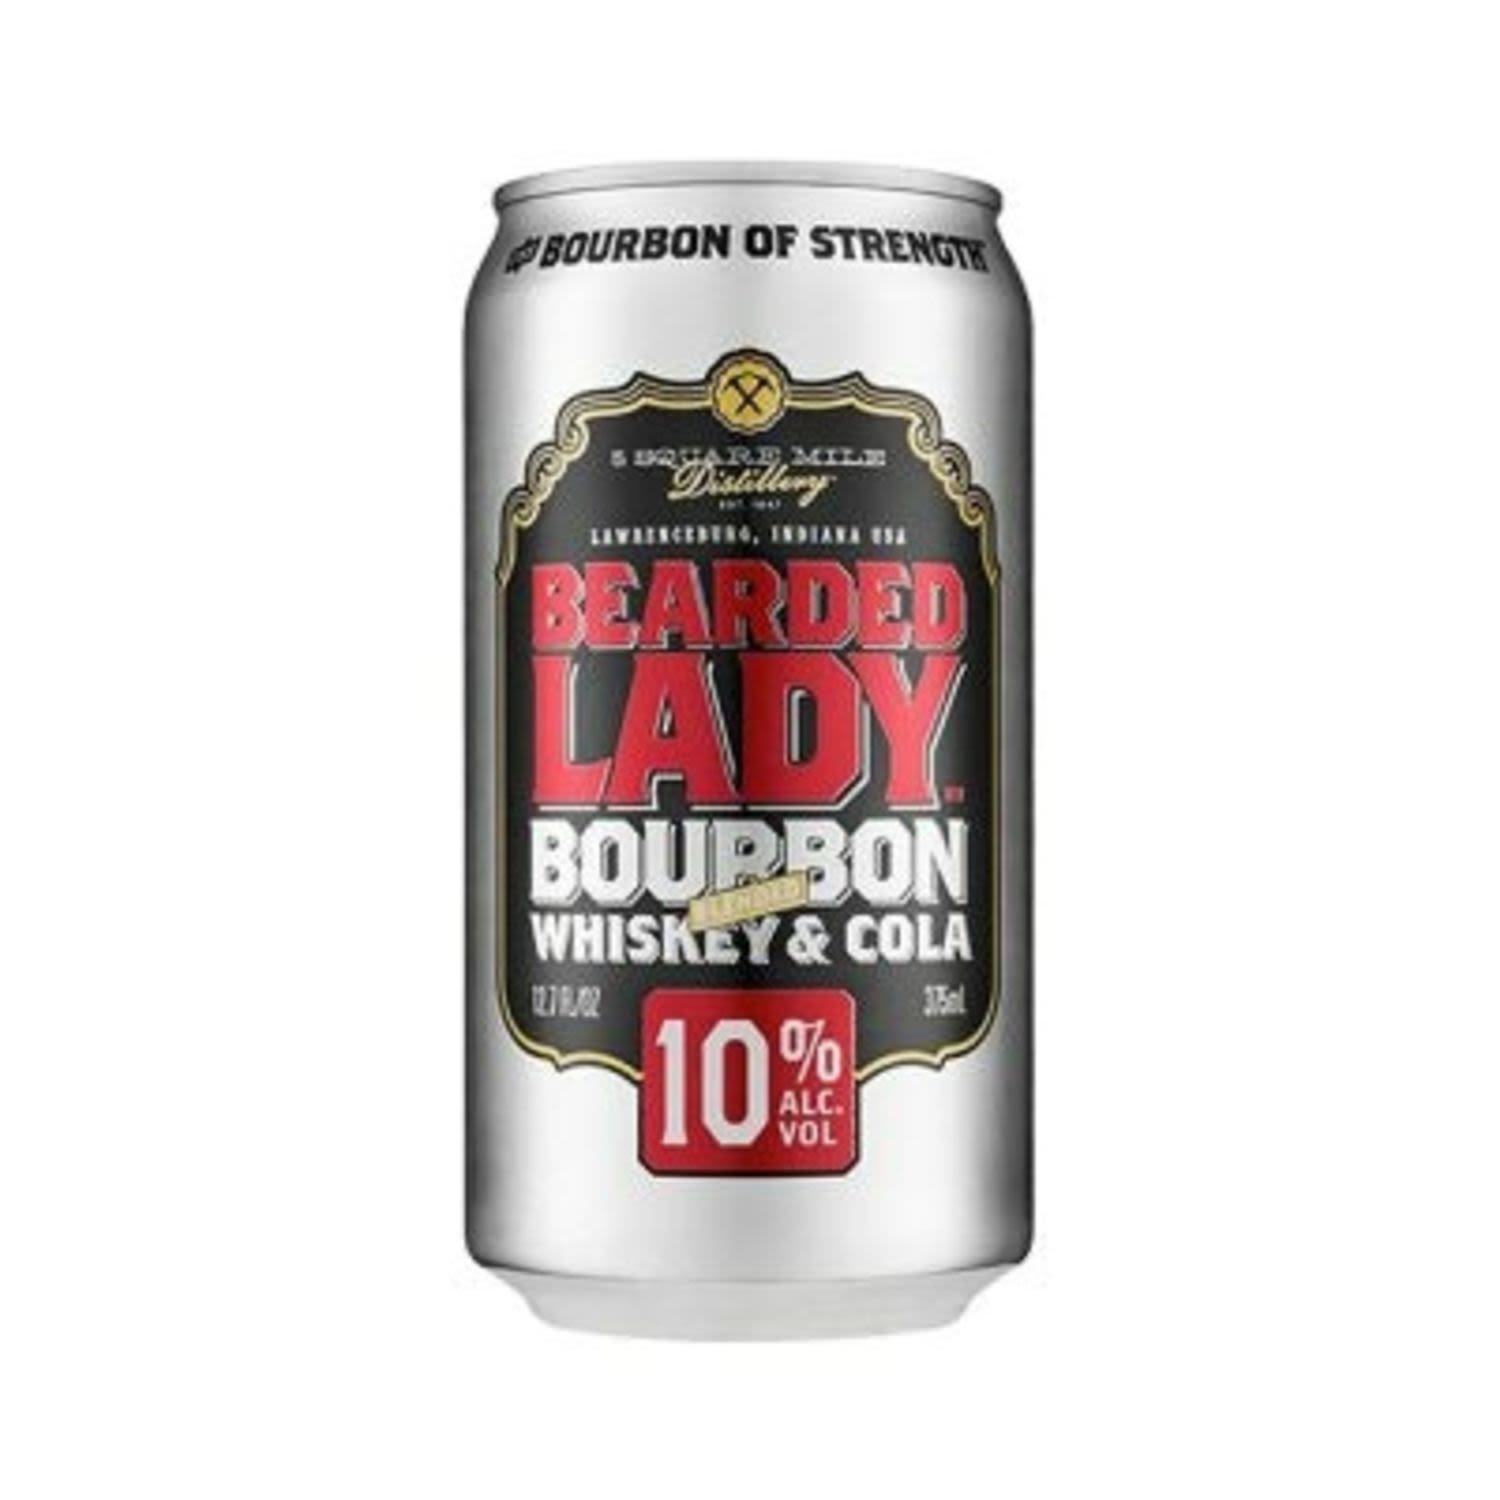 Bearded Lady Bourbon & Cola 10% Can 375mL 24 Pack